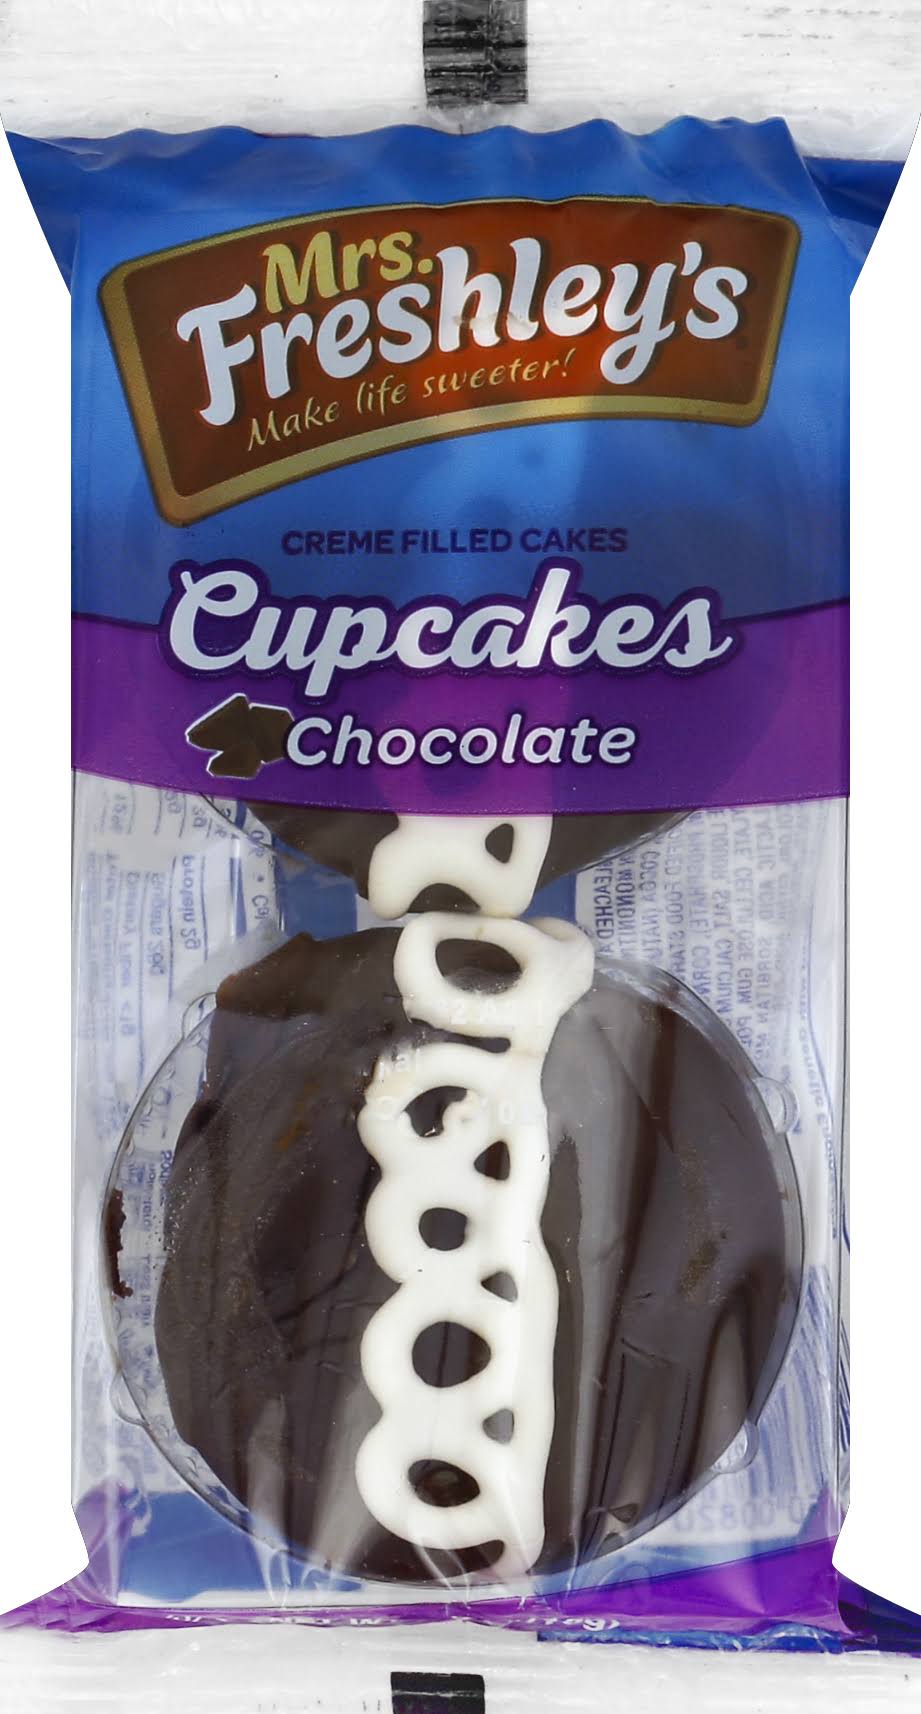 Mrs. Freshley's Cupcakes - Creme Filled Chocolate, 113g